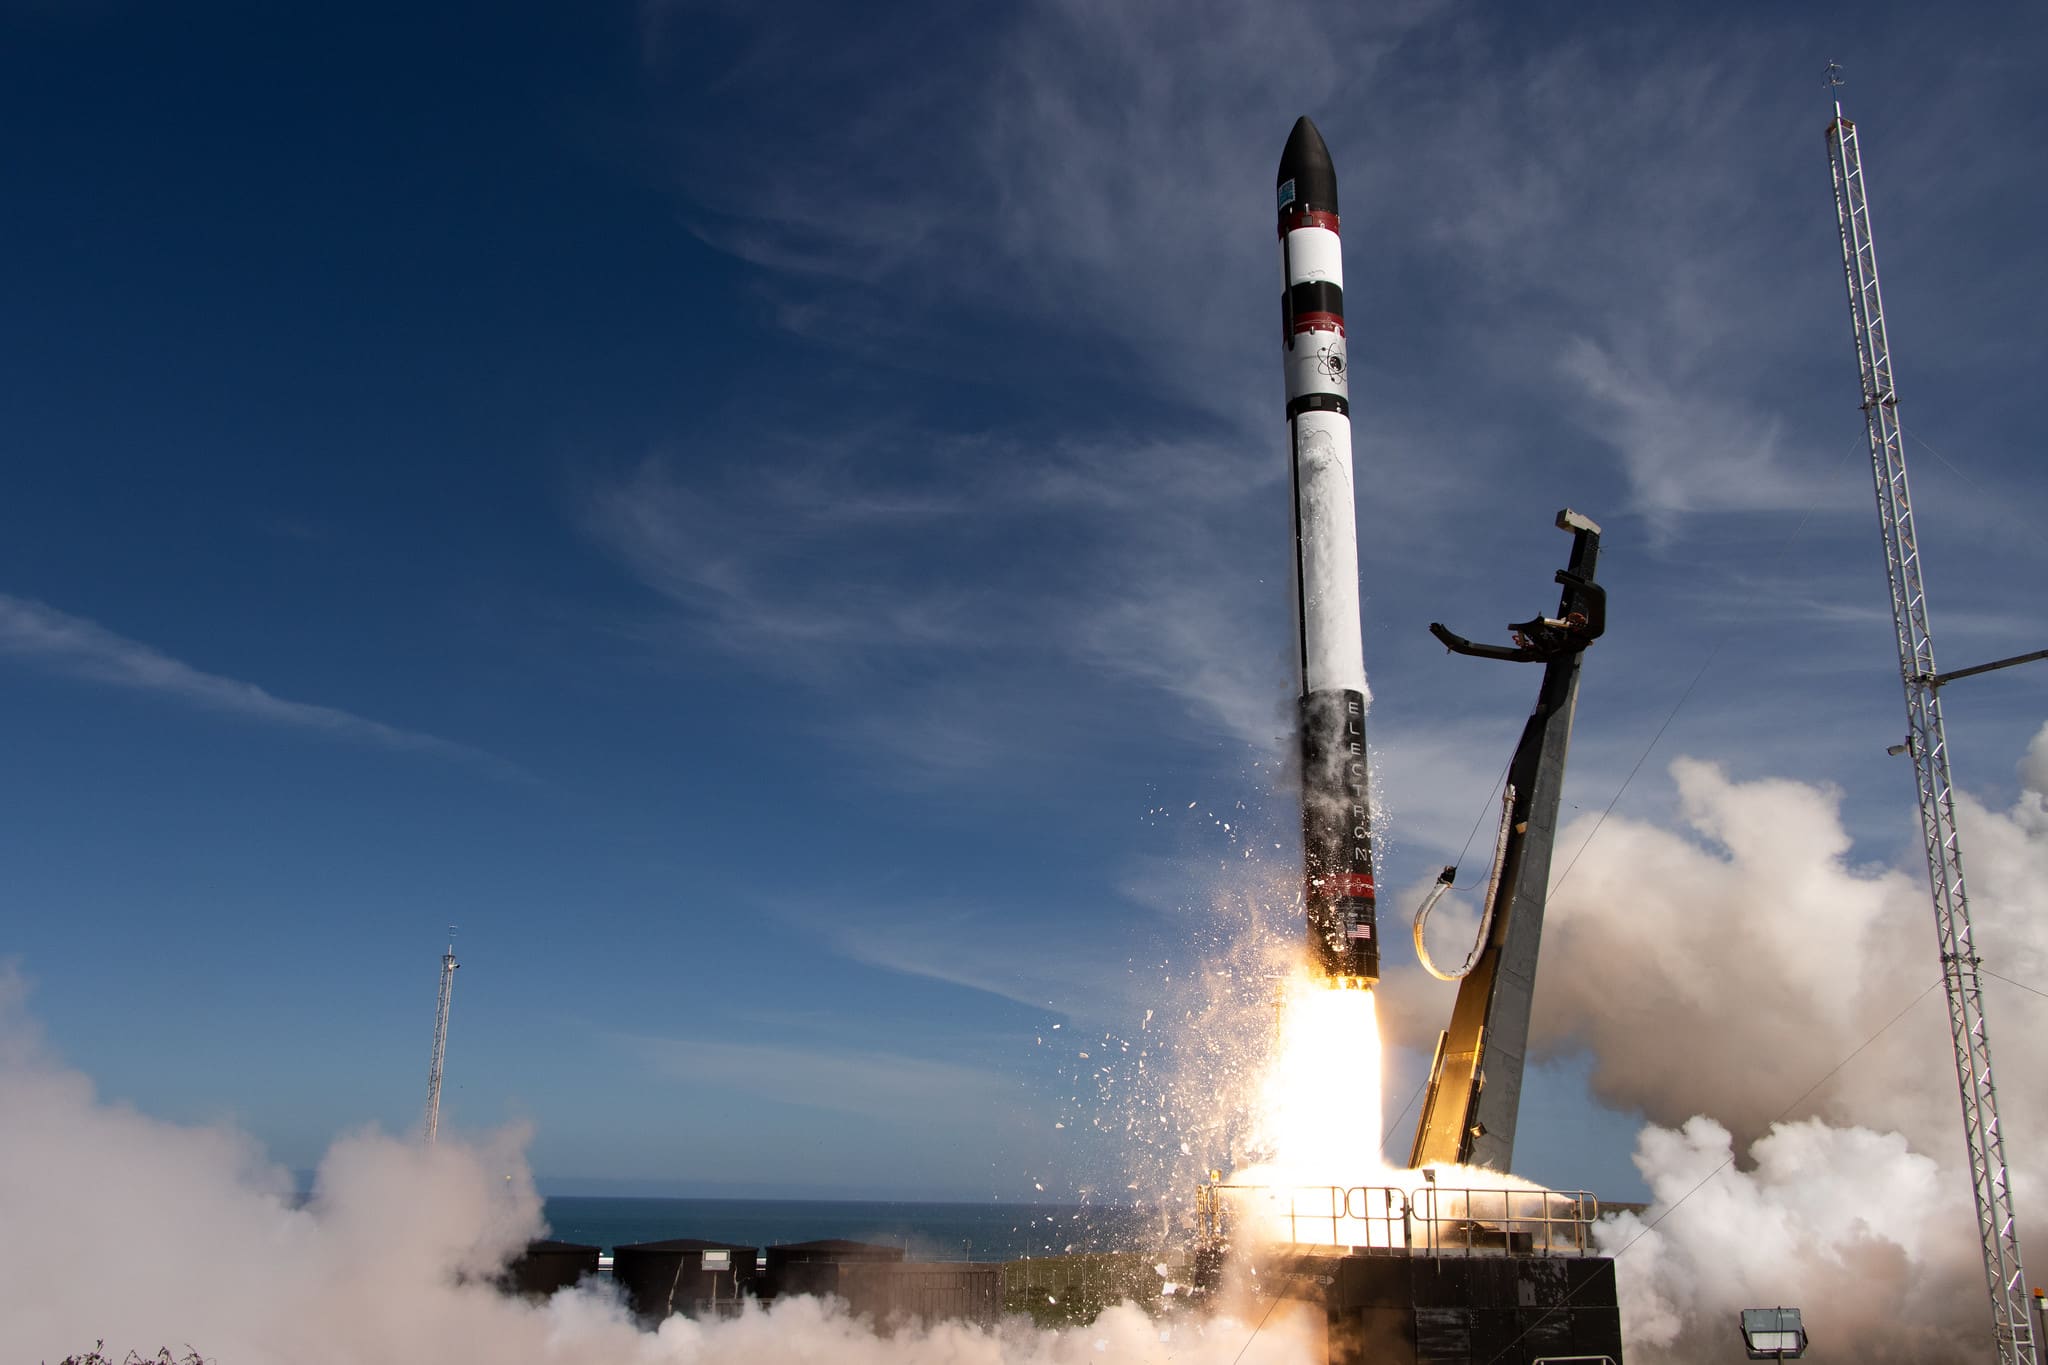 Rocket Lab may launch a boost recovery, with the aim of enabling spaceX reusability